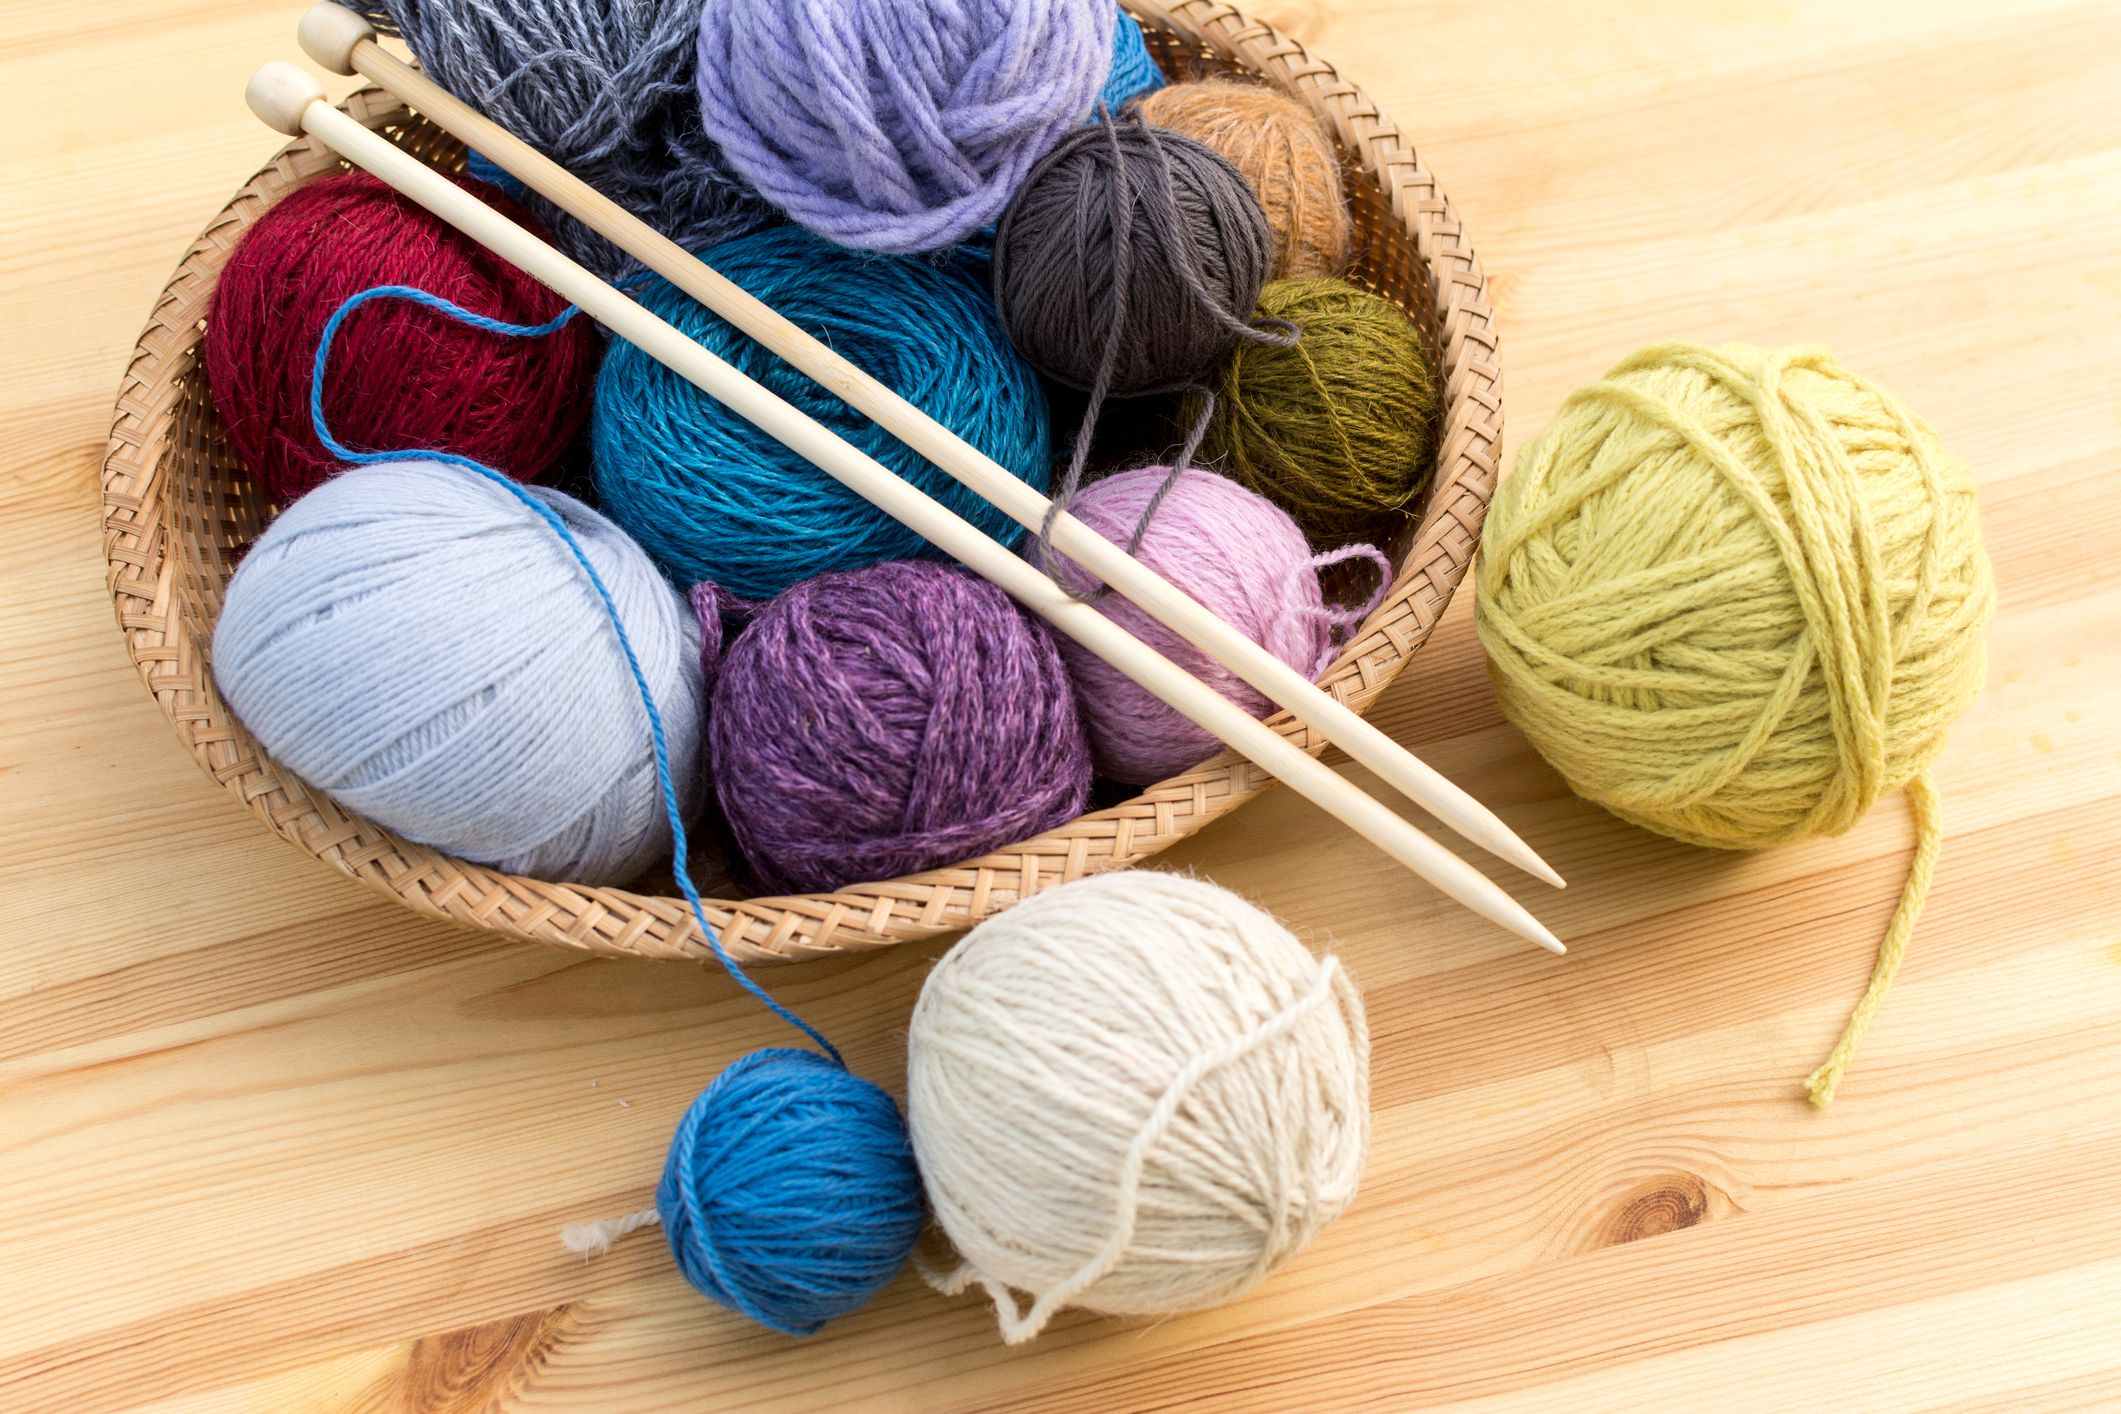 Learn French knitting with our step-by-step video